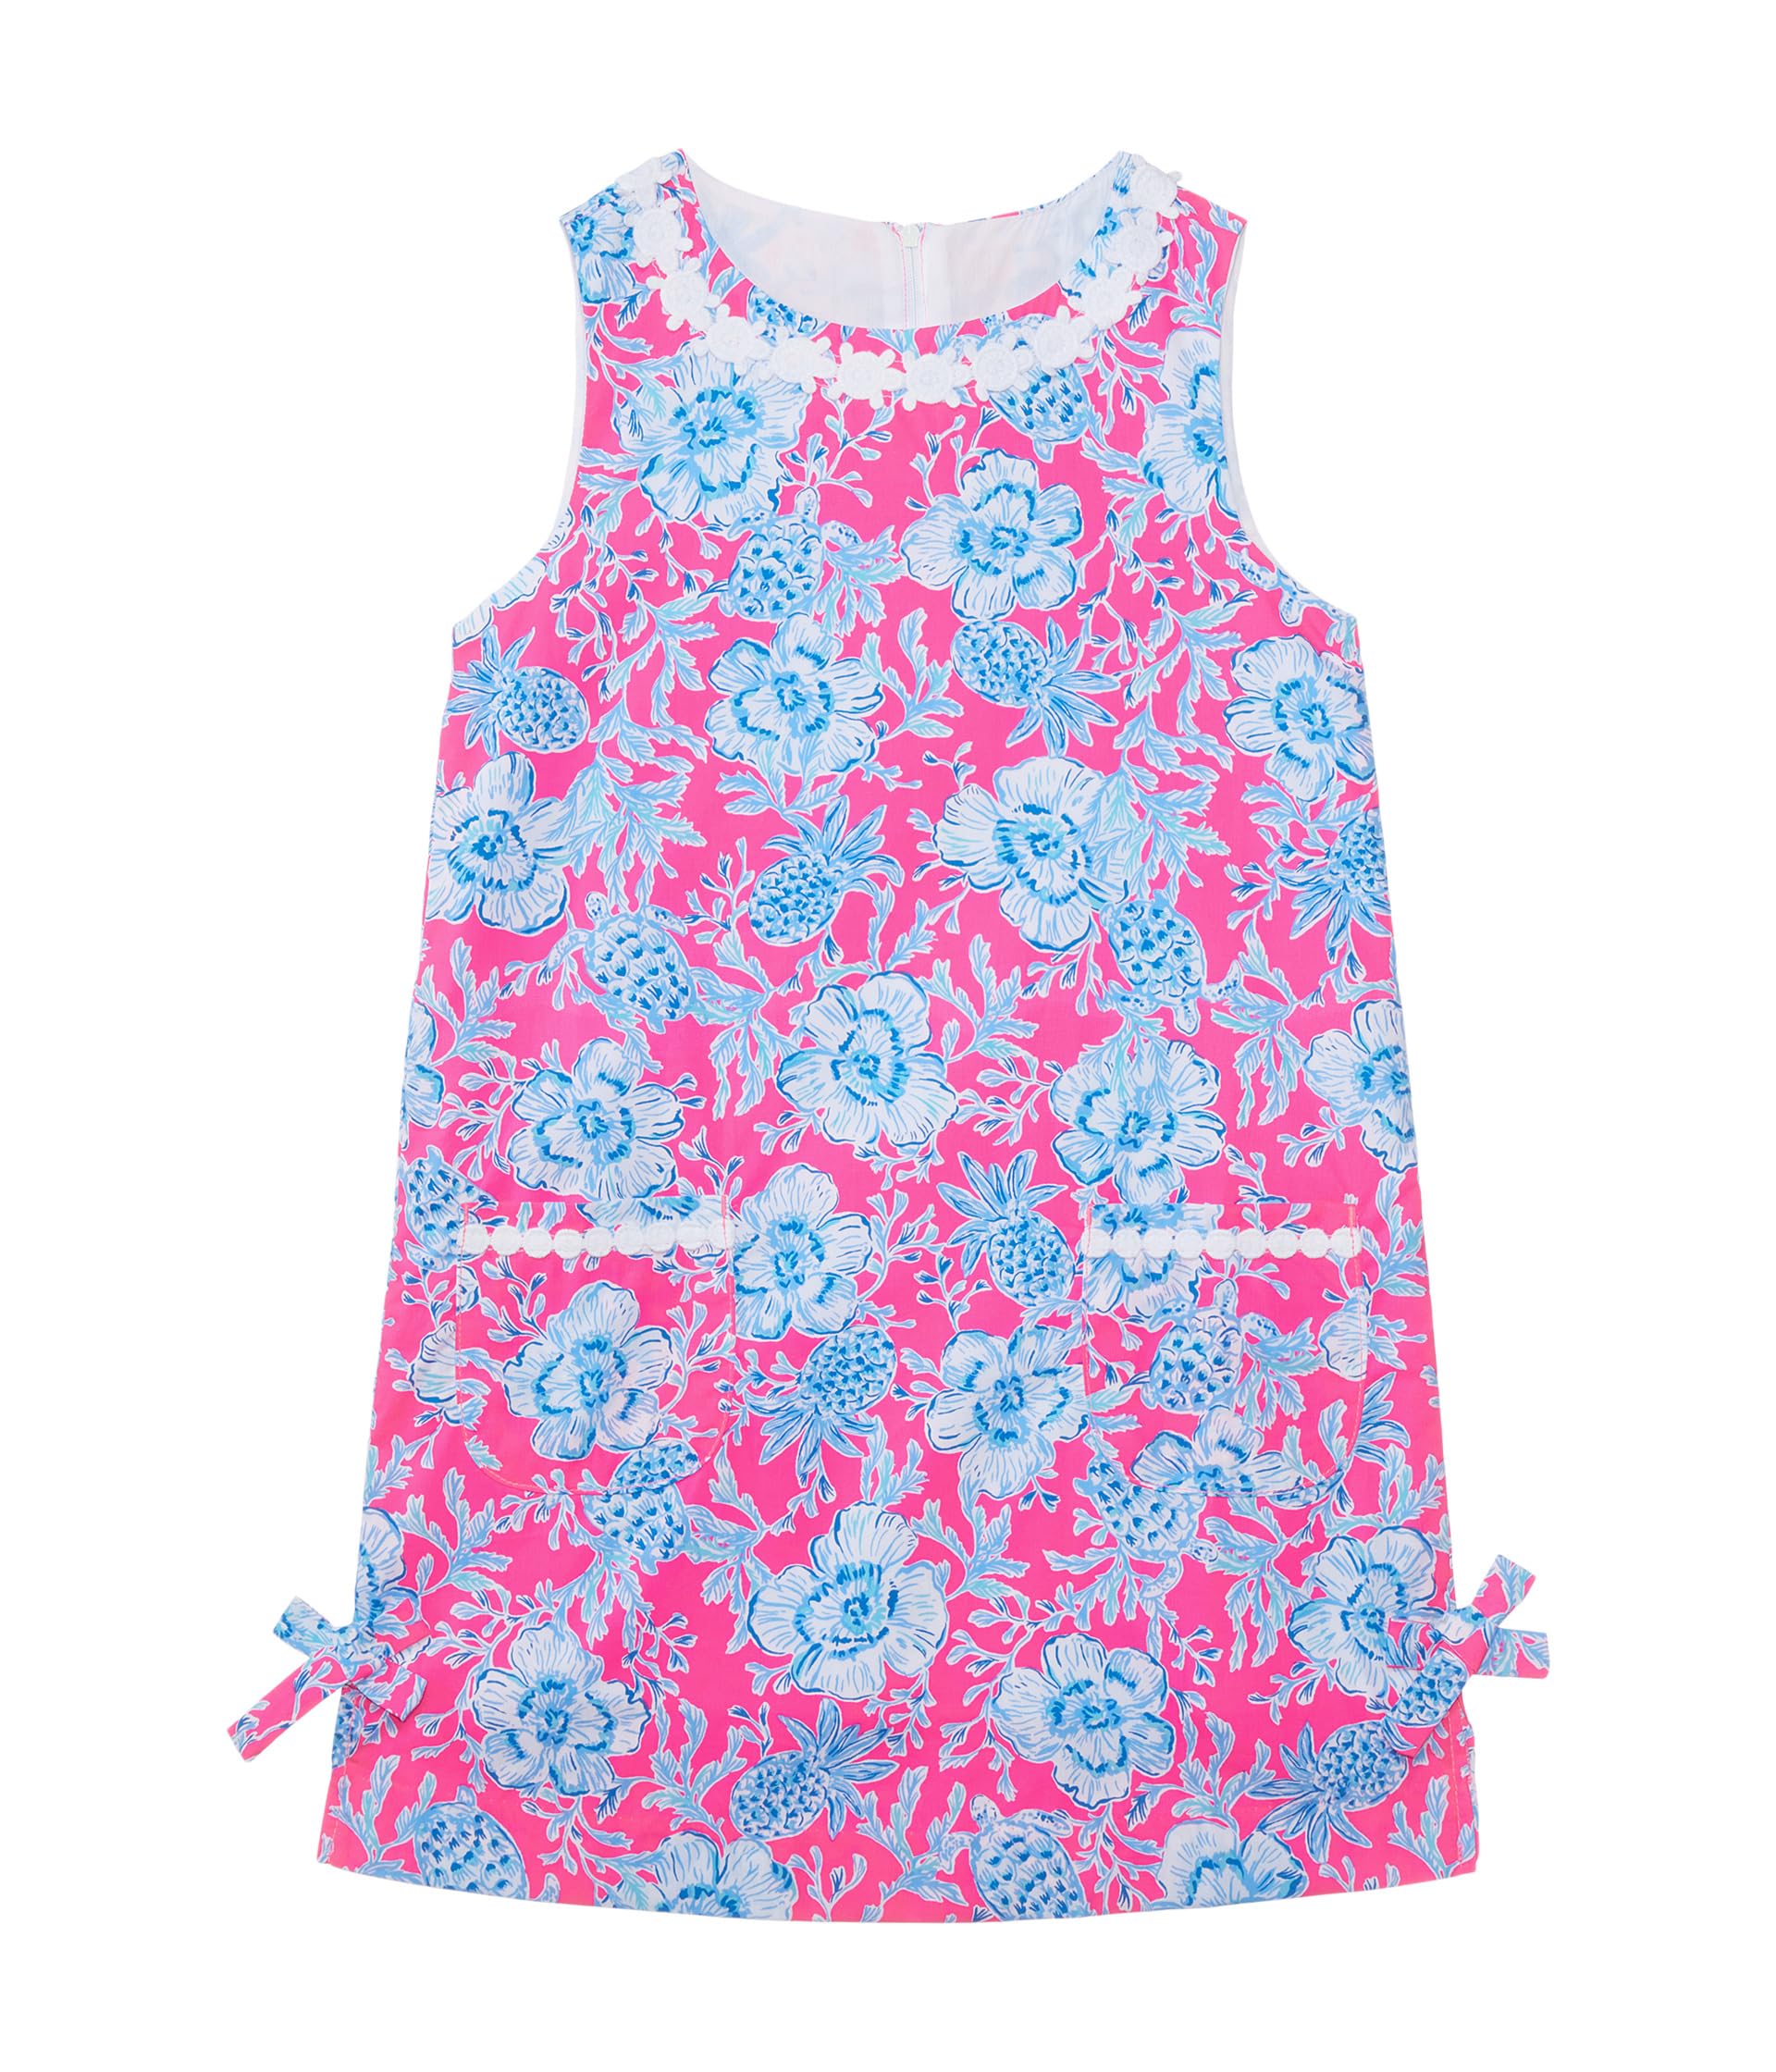 Little Lilly Classic Shift (Little Kid/Big Kid/Toddler) Lilly Pulitzer Kids